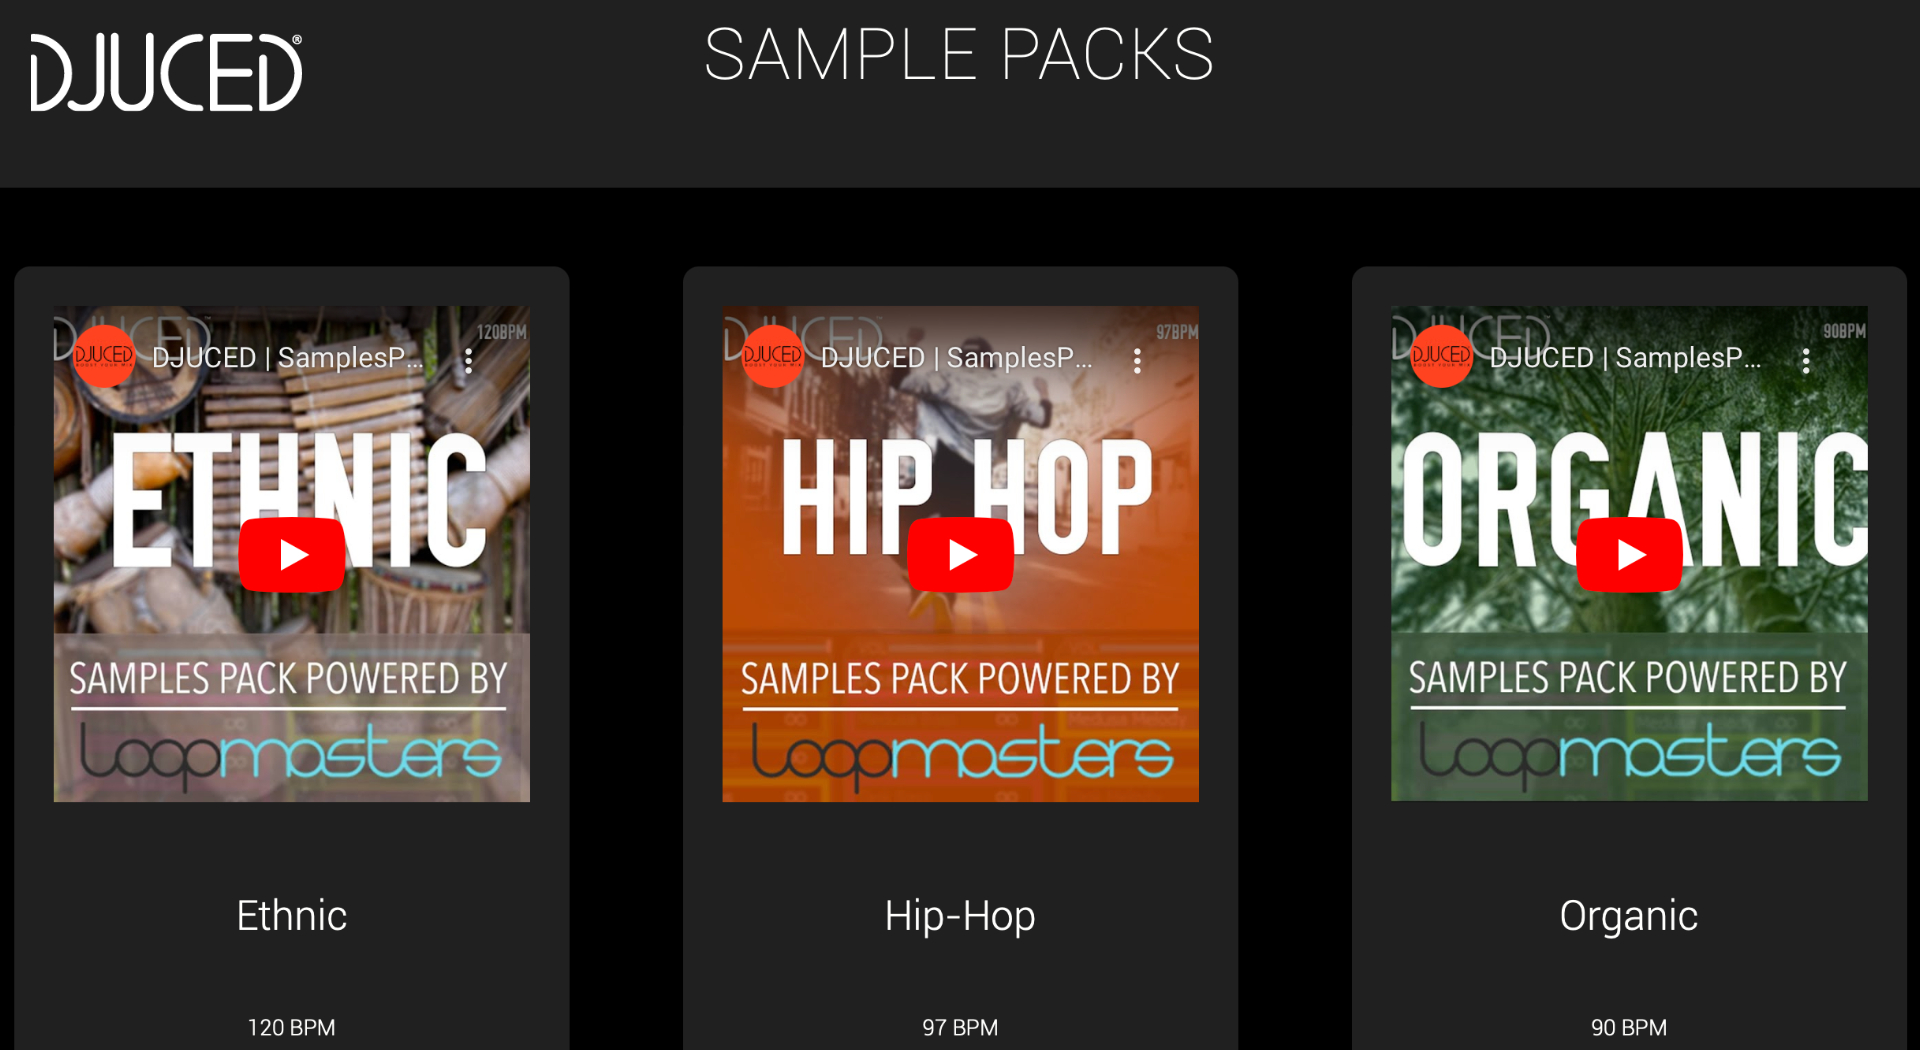 DJUCED_SAMPLE_PACK